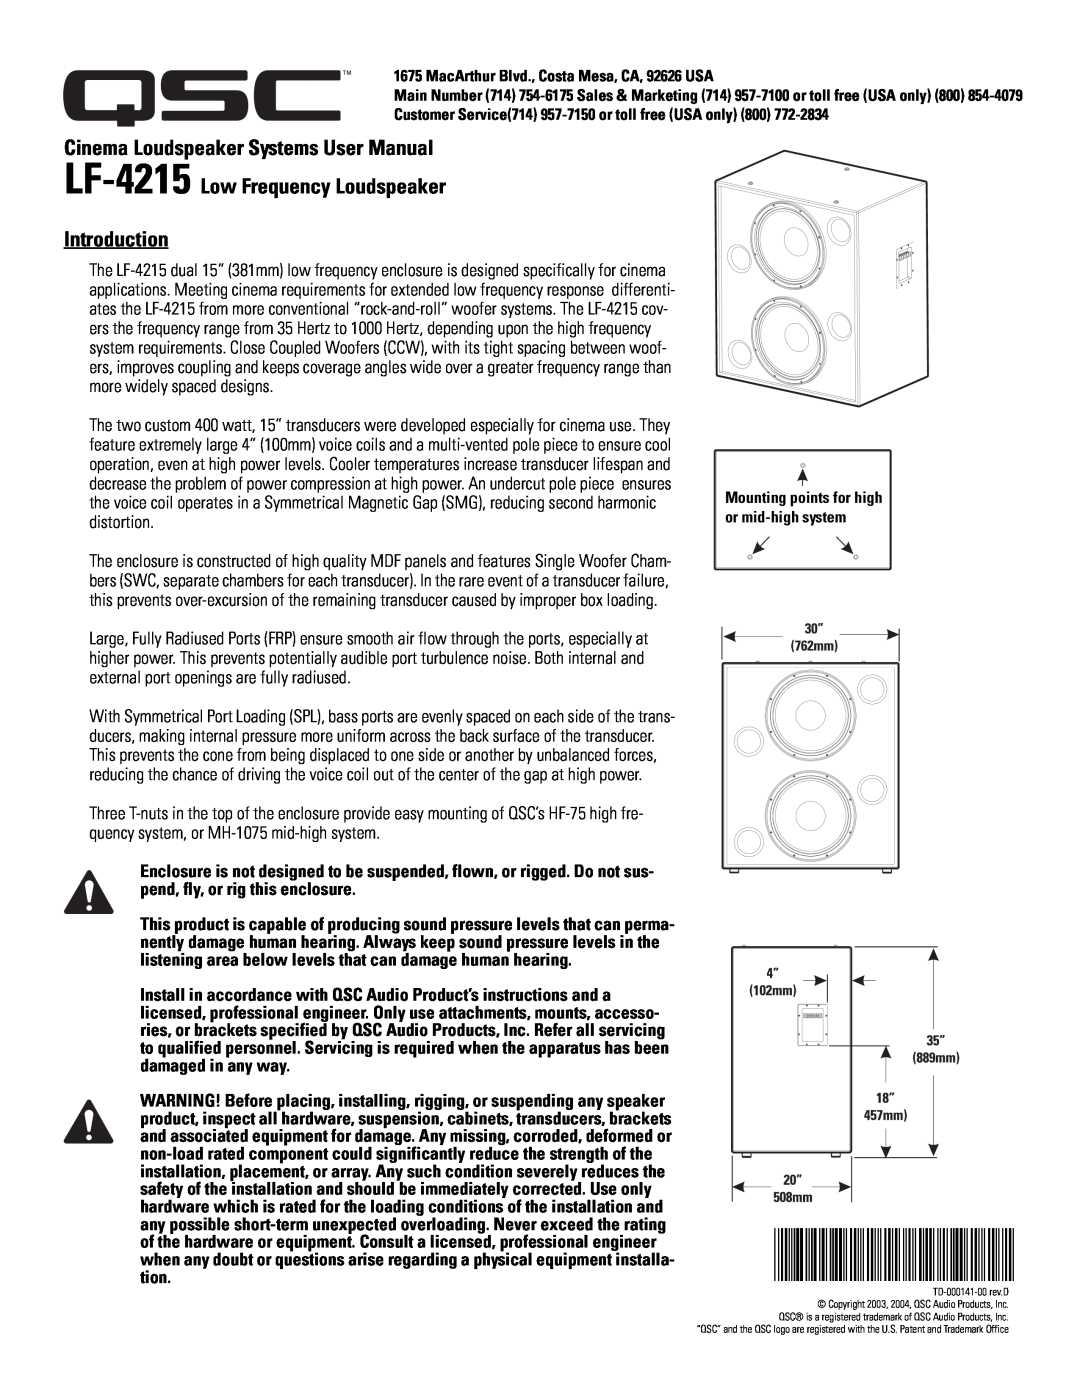 Polaroid user manual LF-4215 Low Frequency Loudspeaker Introduction, TD-000141-00 